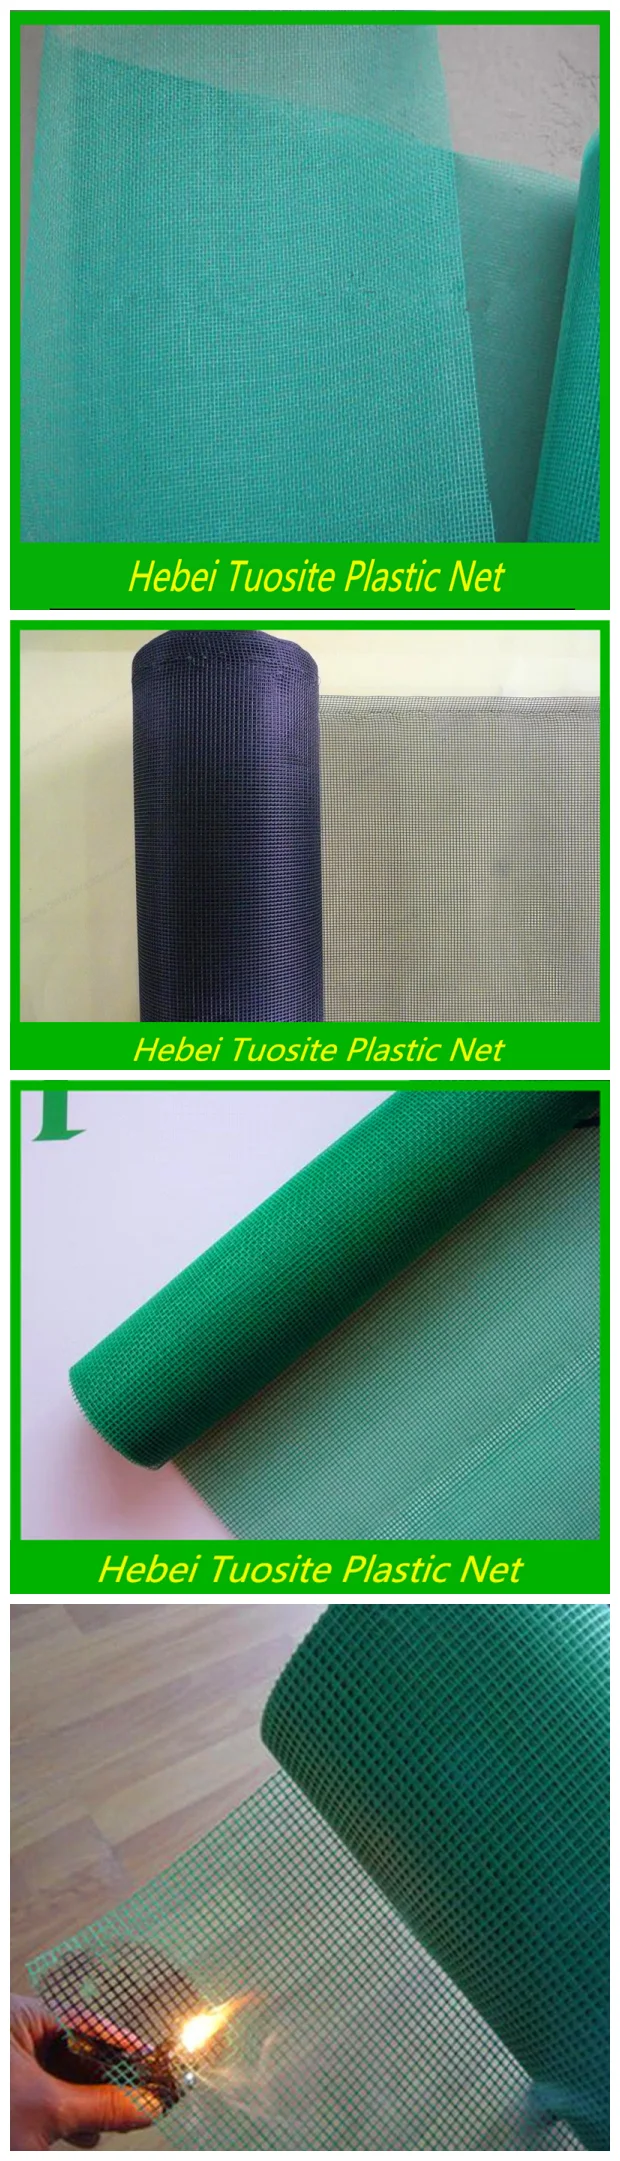 Rolling Window Screen,Anti Mosquito Net Insect Screen,Fiberglass Windows Screens/Fiberglass Insect